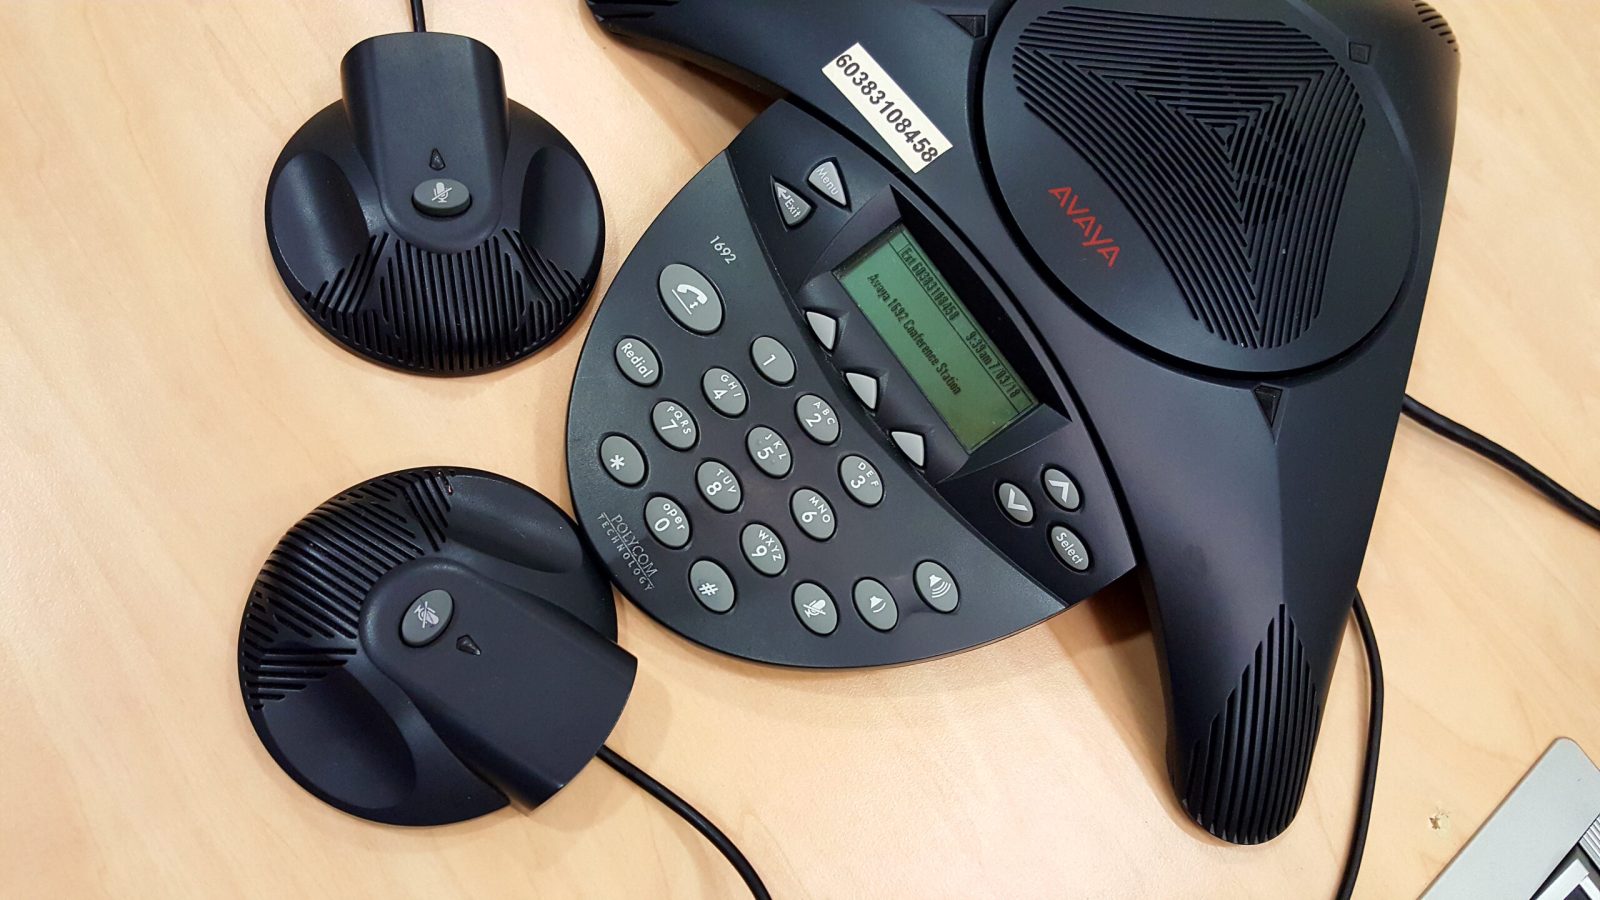 Elevate your conference experience with Polycom phones. Crystal-clear audio and advanced features for effective communication. Serving Des Moines, Ankeny, and all of Iowa.